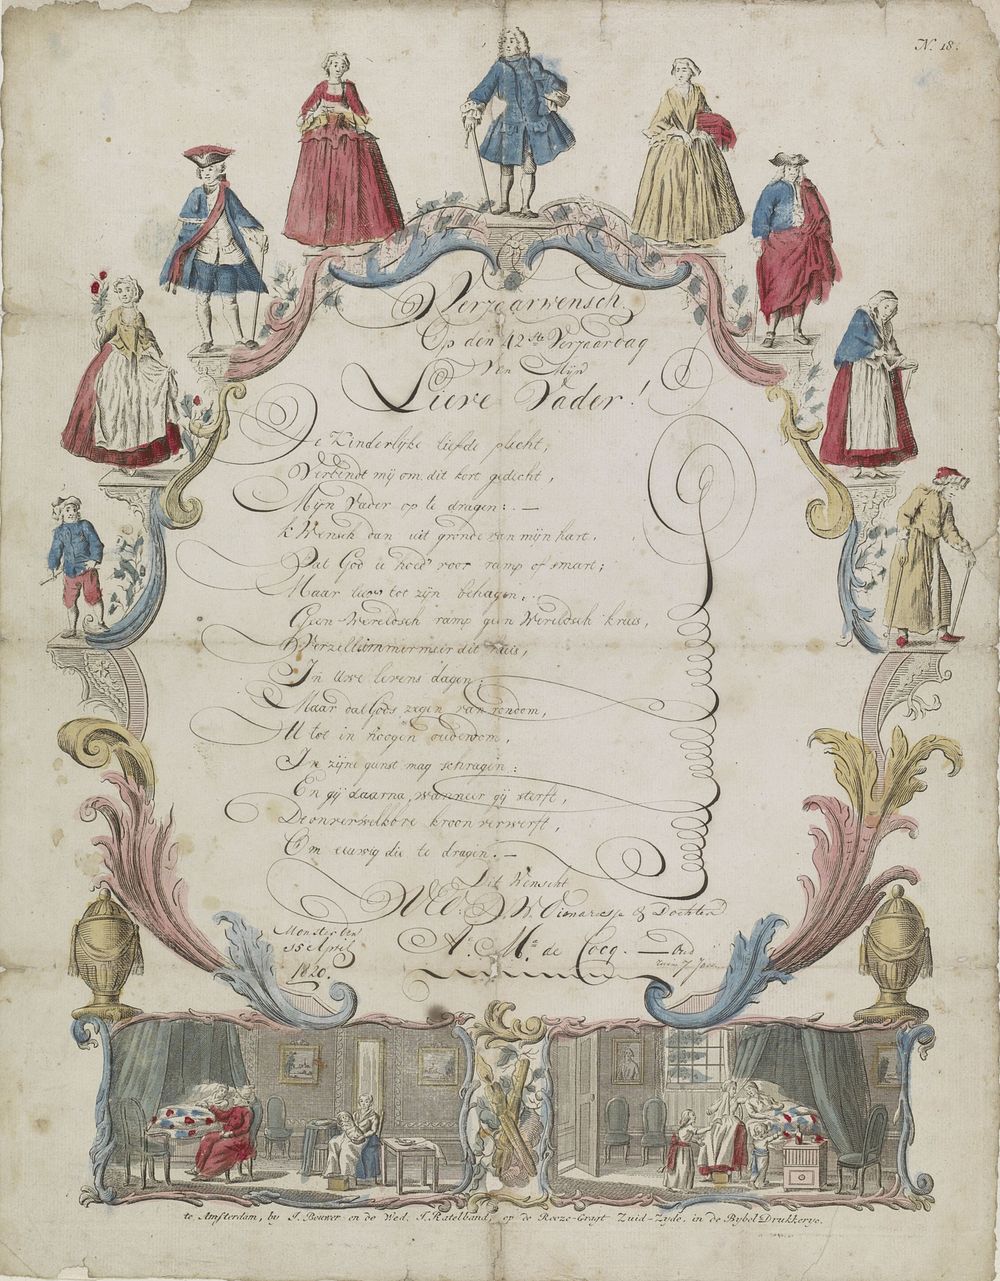 Wensbrief met trap des ouderdoms (1820) by weduwe Jeronimus Ratelband en Johannes Bouwer and anonymous